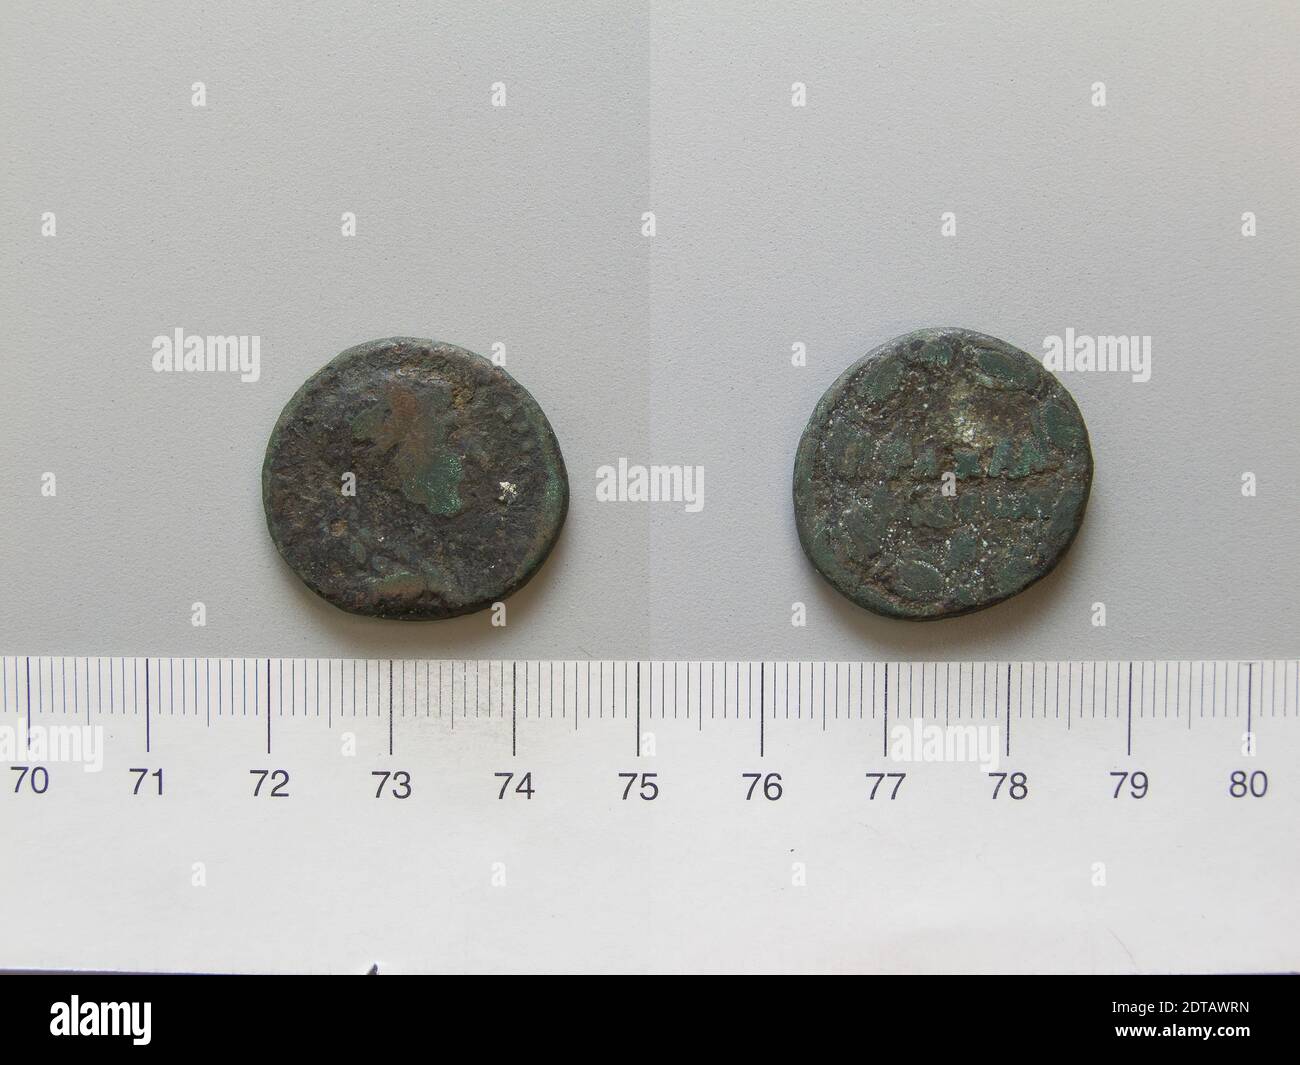 Ruler: Trajan, Emperor of Rome, A.D. 53–117, ruled 98–117, Mint: Chalcis, Coin of Trajan, Emperor of Rome from Chalcis, 98–117, Copper, 9.56 g, 1:00, 24.80 mm, Made in Chalcis, Euboea, Roman, 1st–2nd century, Numismatics Stock Photo